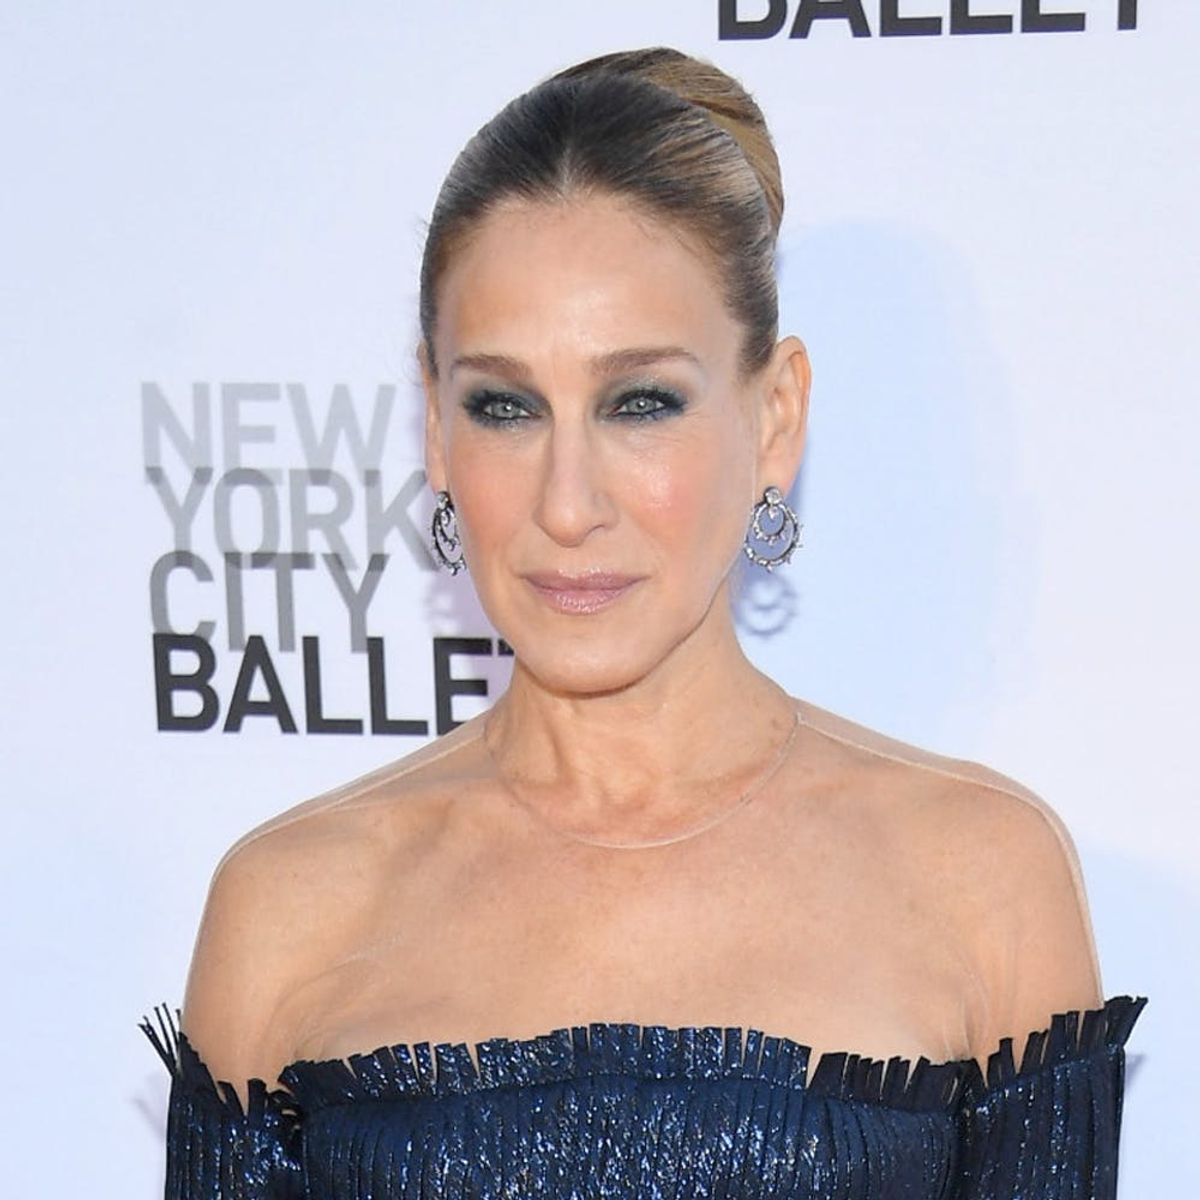 Sarah Jessica Parker Just Slayed the Red Carpet in a Fringe Dress Carrie Bradshaw Would Applaud